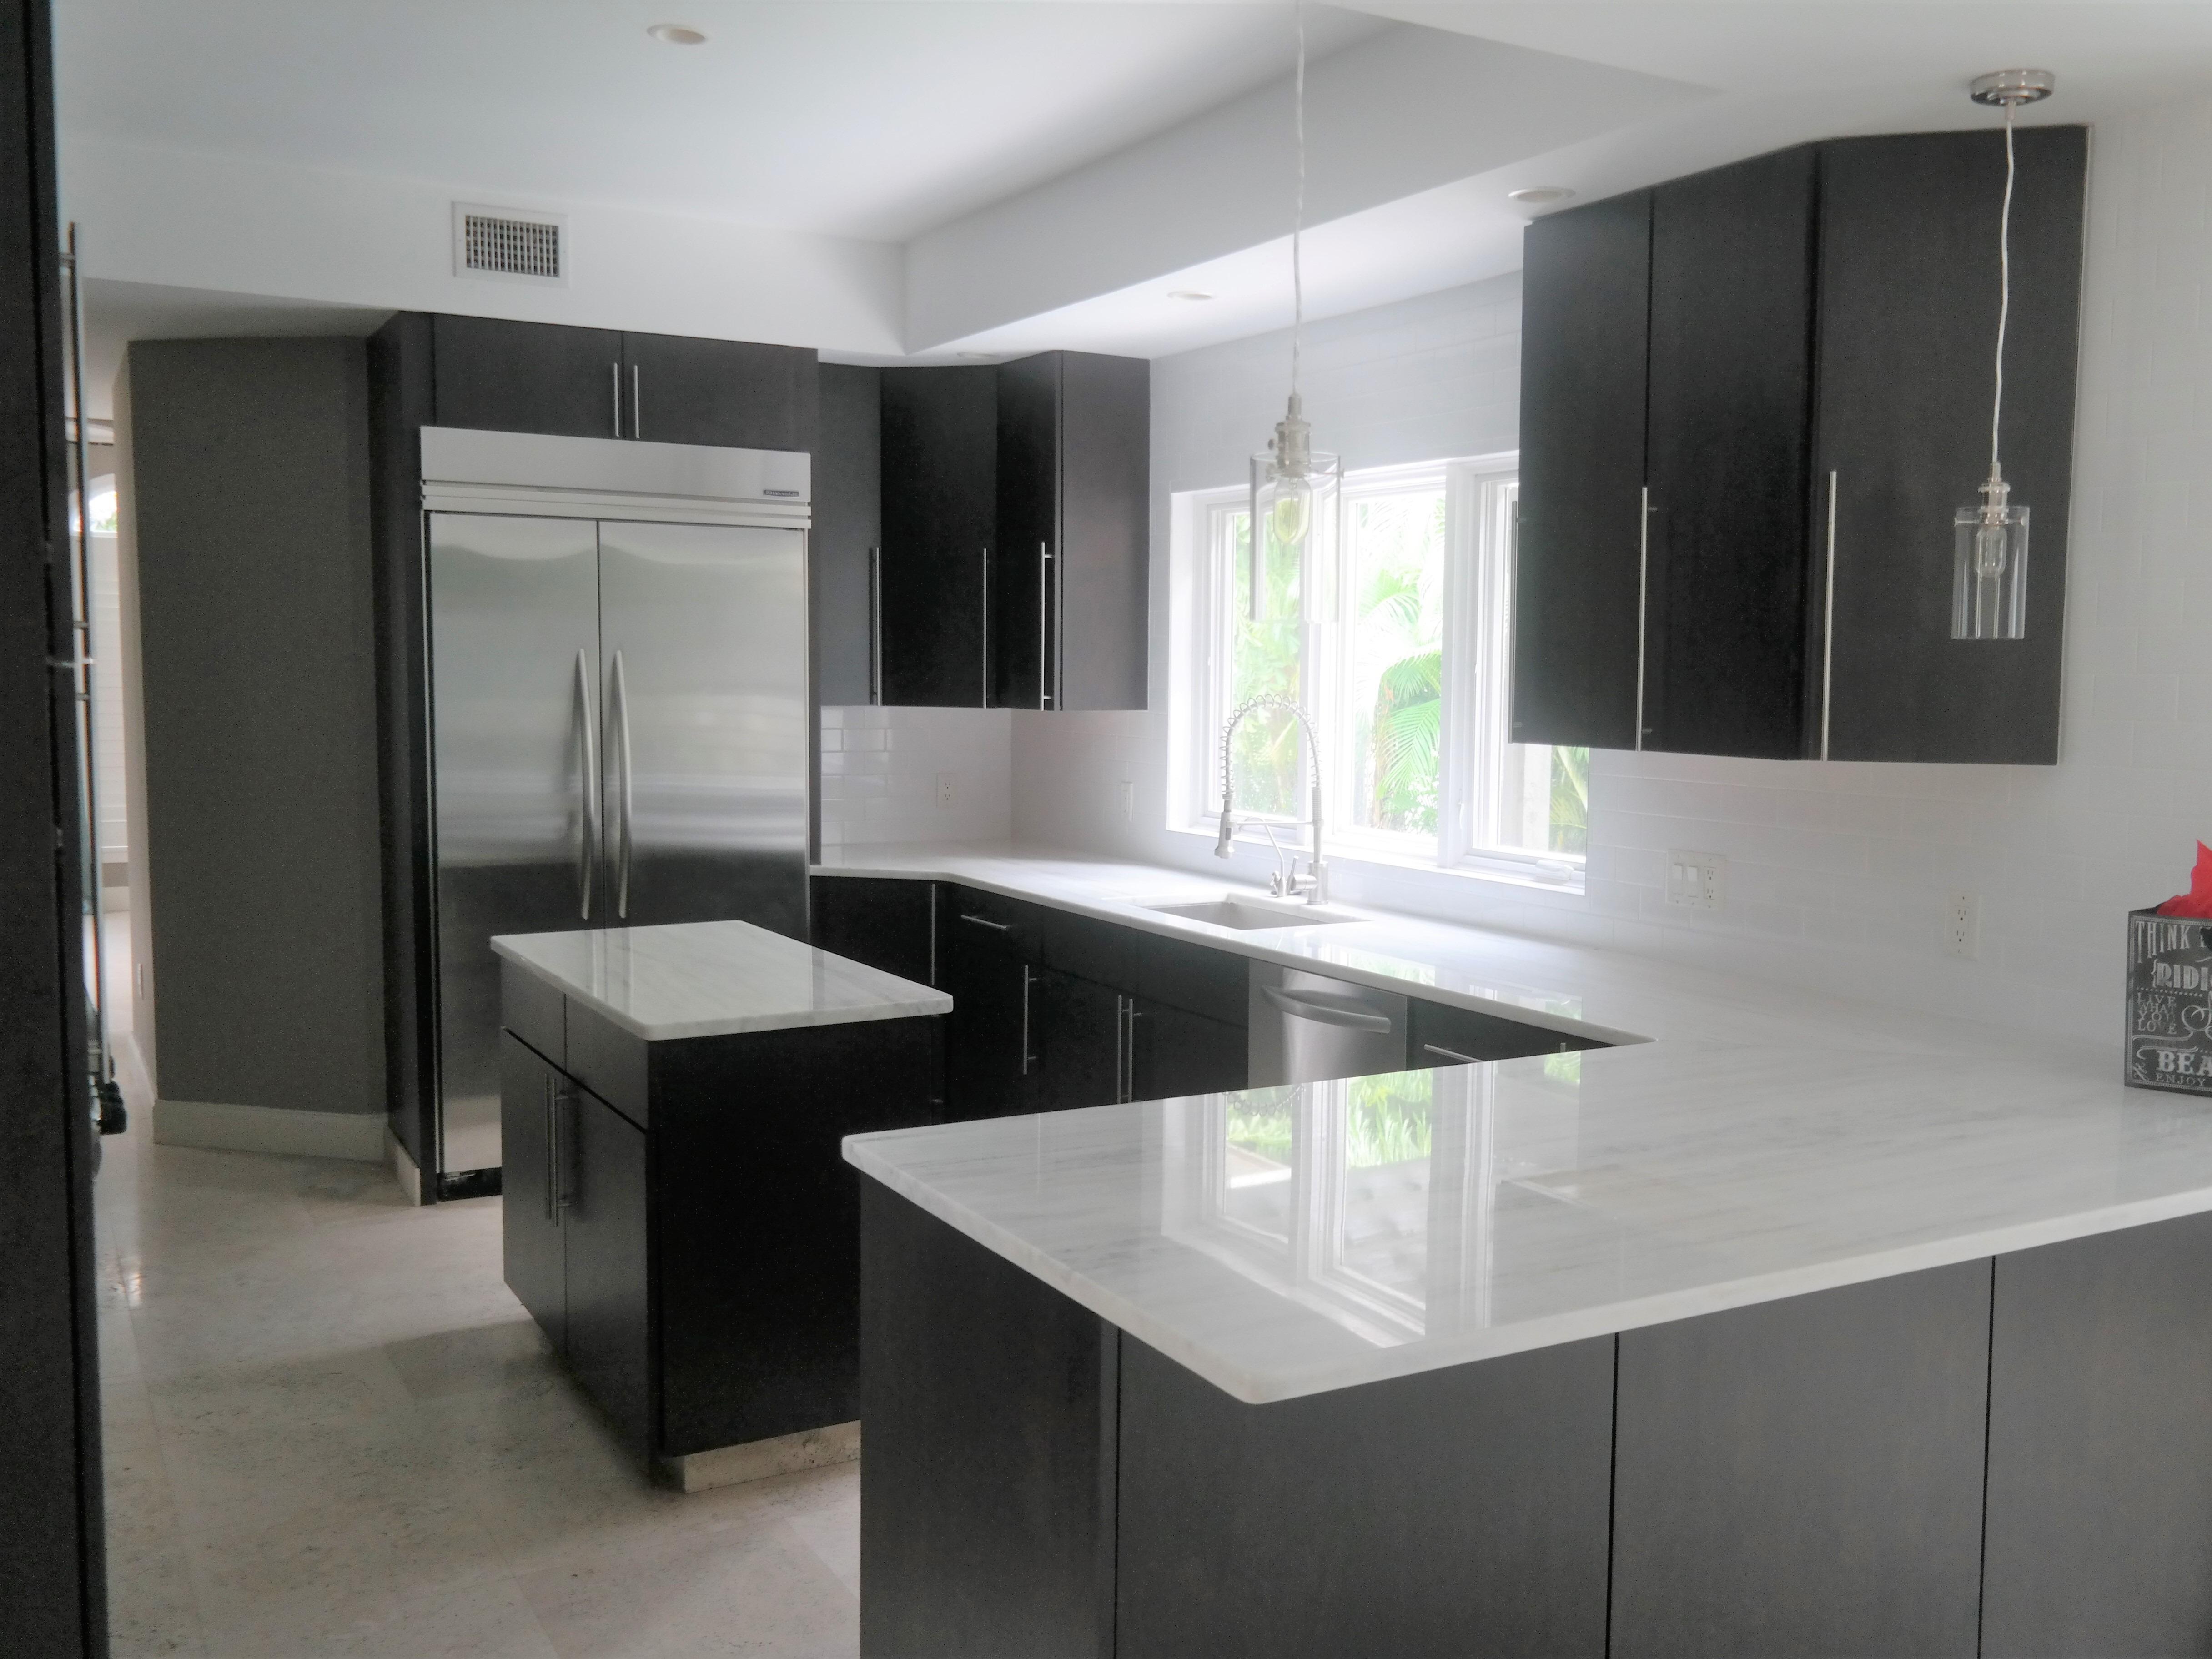 Re-A-Door Kitchen Cabinets Refacing Tampa High-quality modern kitchen cabinet doors in Tampa Florida paired with granite countertops and stainless steel appliances for a sleek, contemporary look.